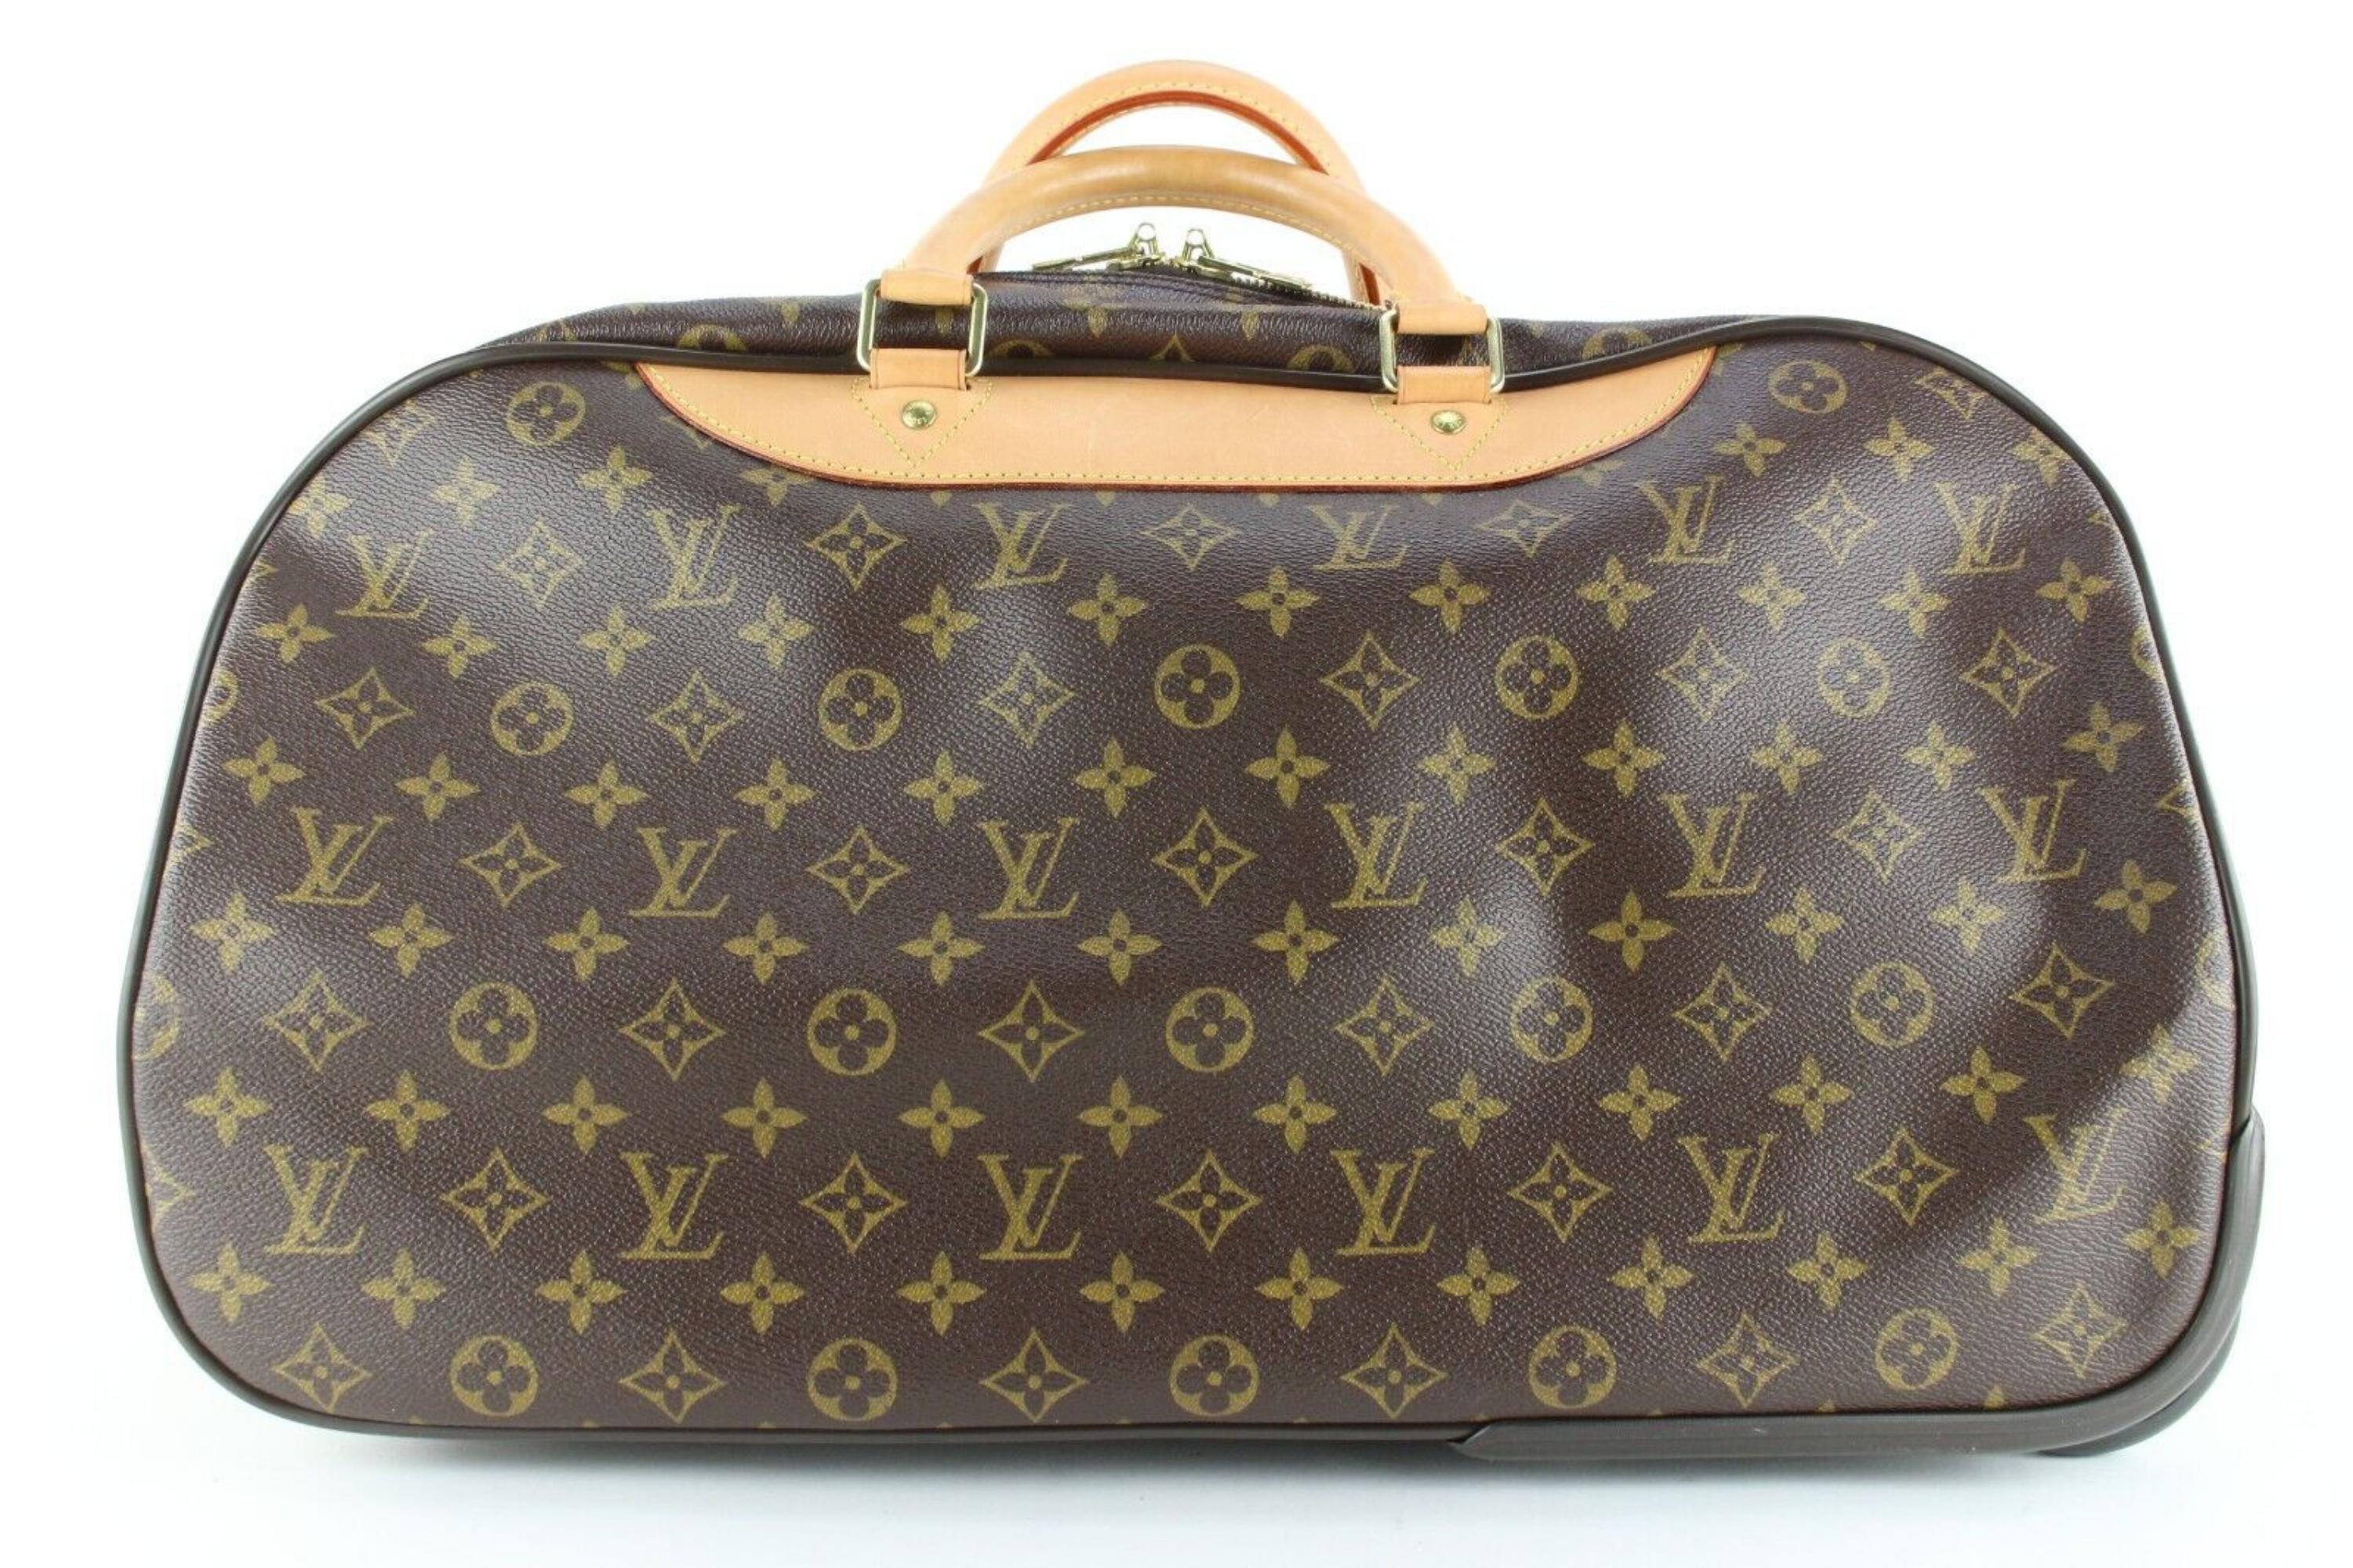 Louis Vuitton Monogram Eole 50 - Brown Luggage and Travel